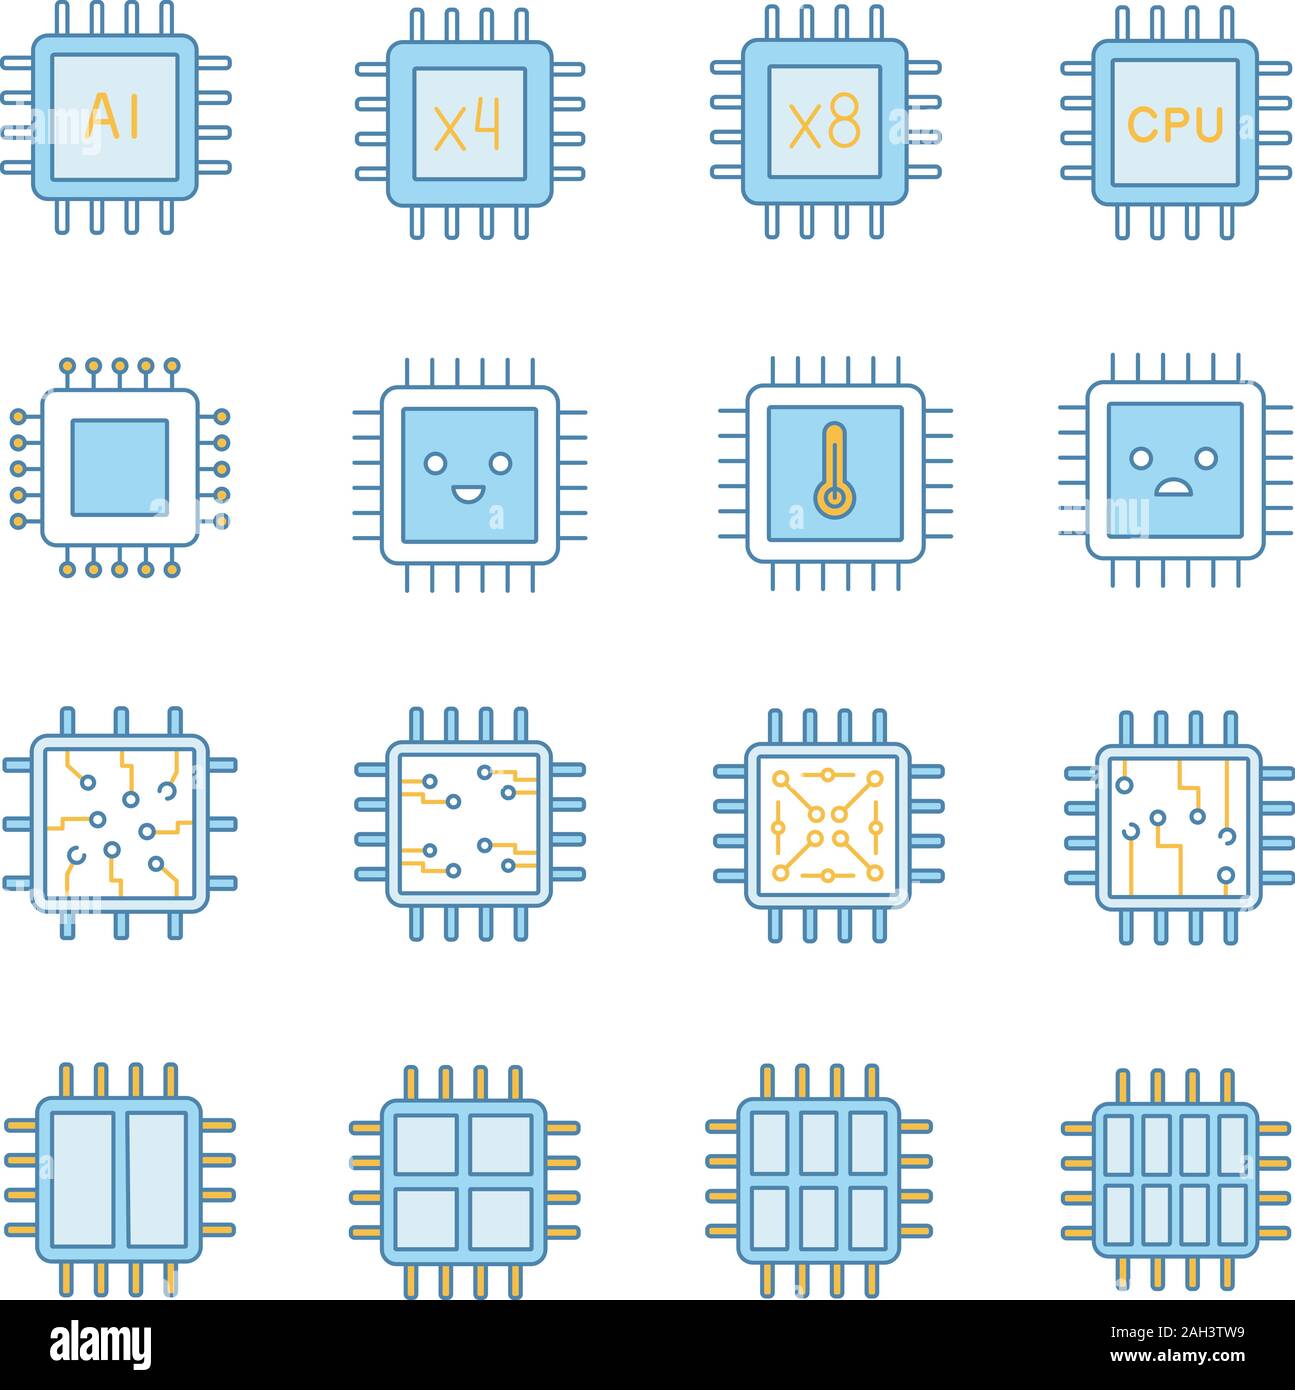 Processors color icons set. Multi-core processors. Chips, microchips, chipsets. CPU. Central processing units. Integrated circuits. Isolated vector il Stock Vector